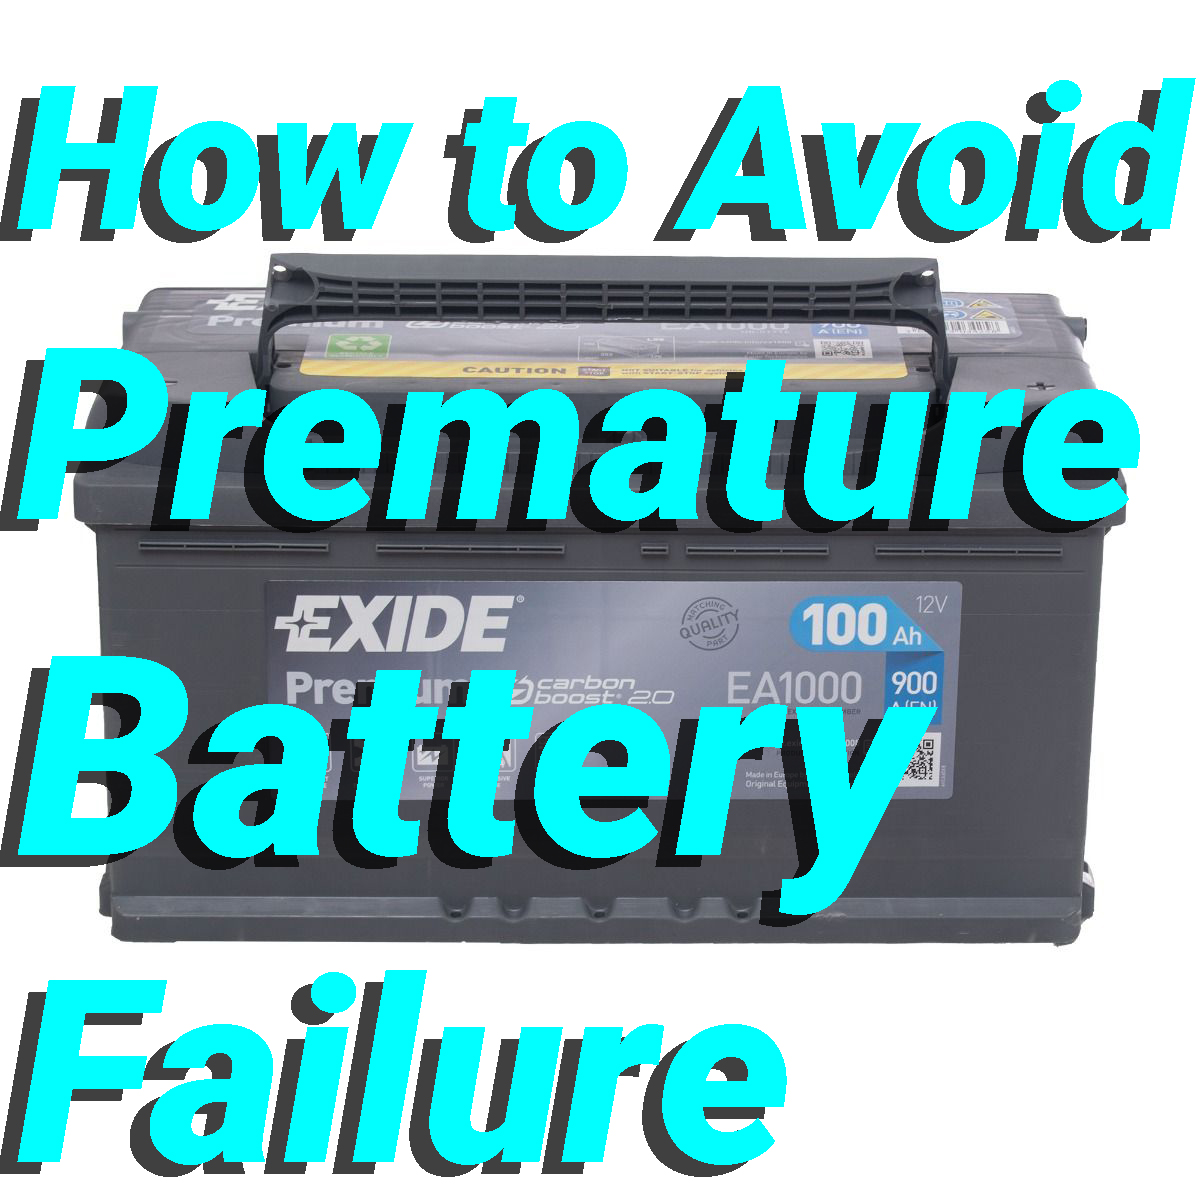 How to Avoid Premature Battery Failure